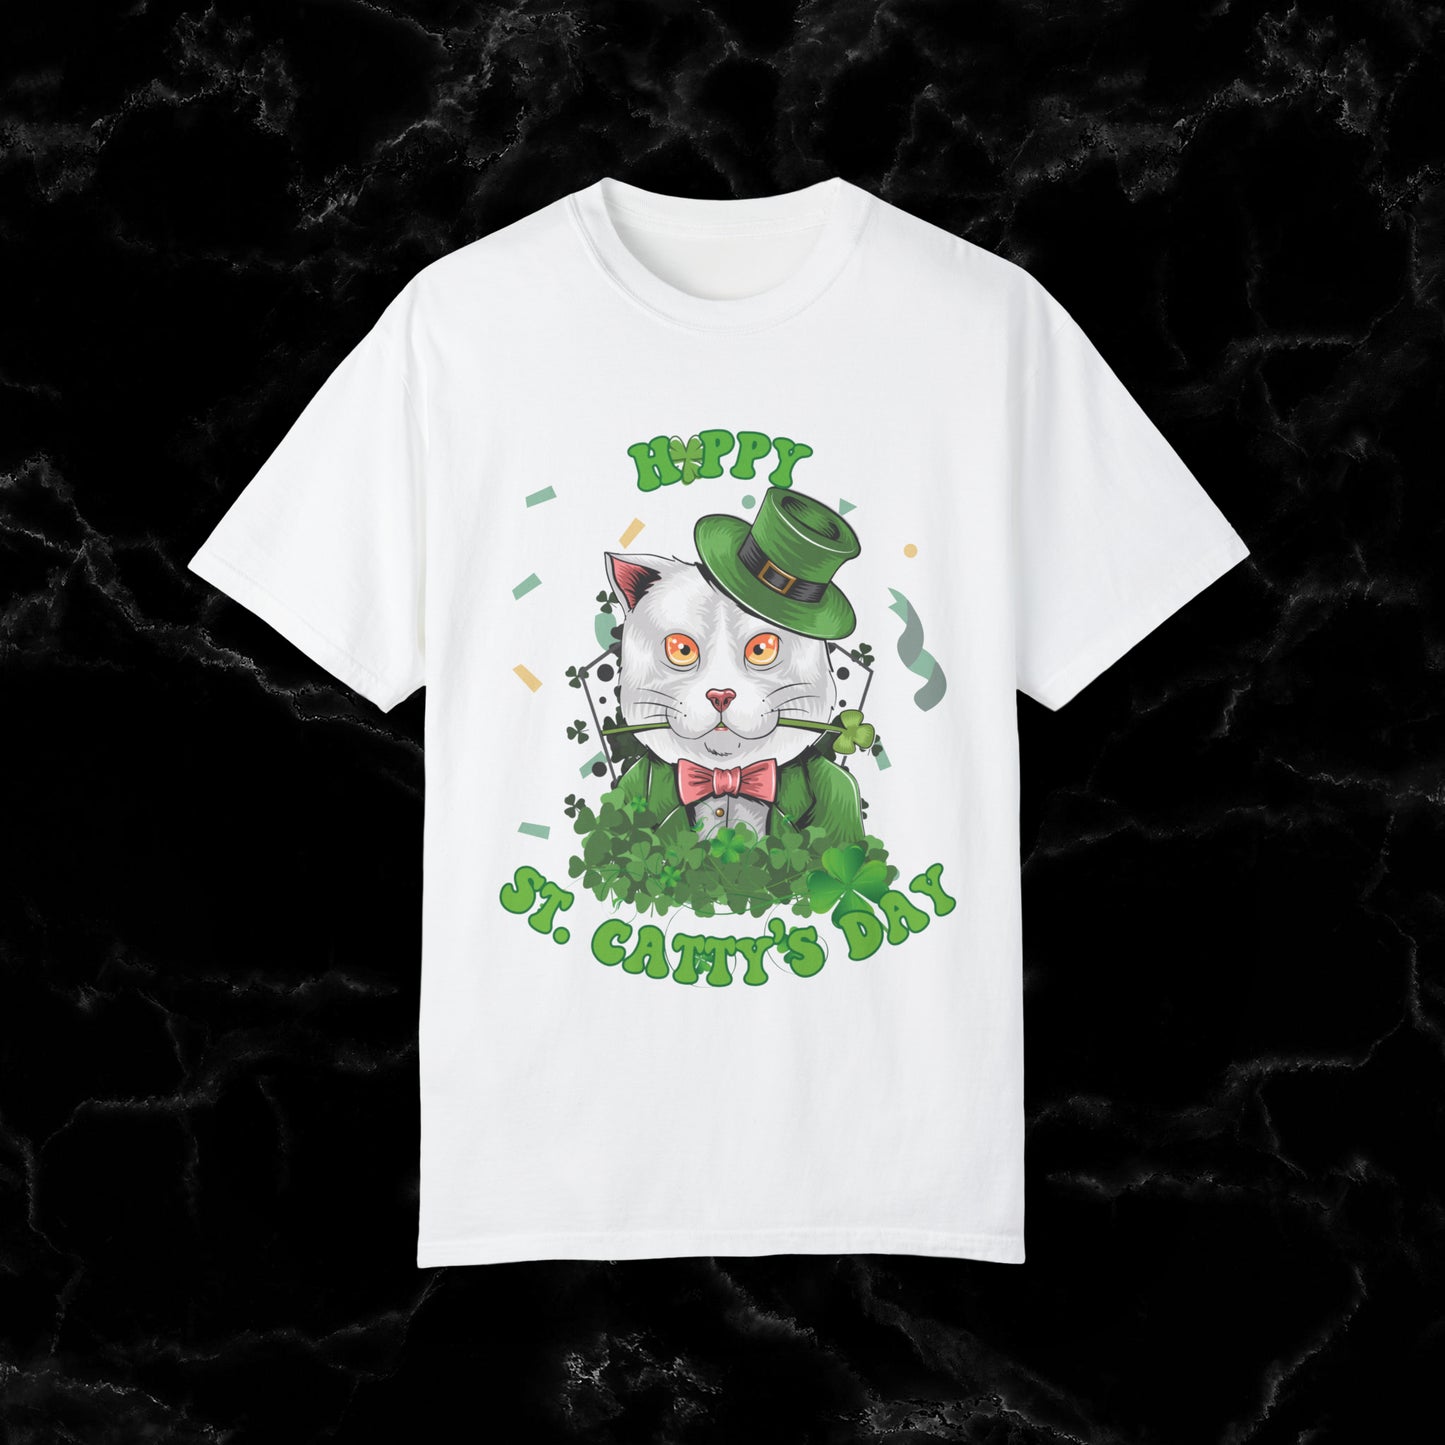 Happy St. Catty's Day Funny St. Patrick's Day Comfort Colors T-Shirt - St. Paddy's Day Shirt for Cat Lover St. Patty's Day Fun T-Shirt White S 